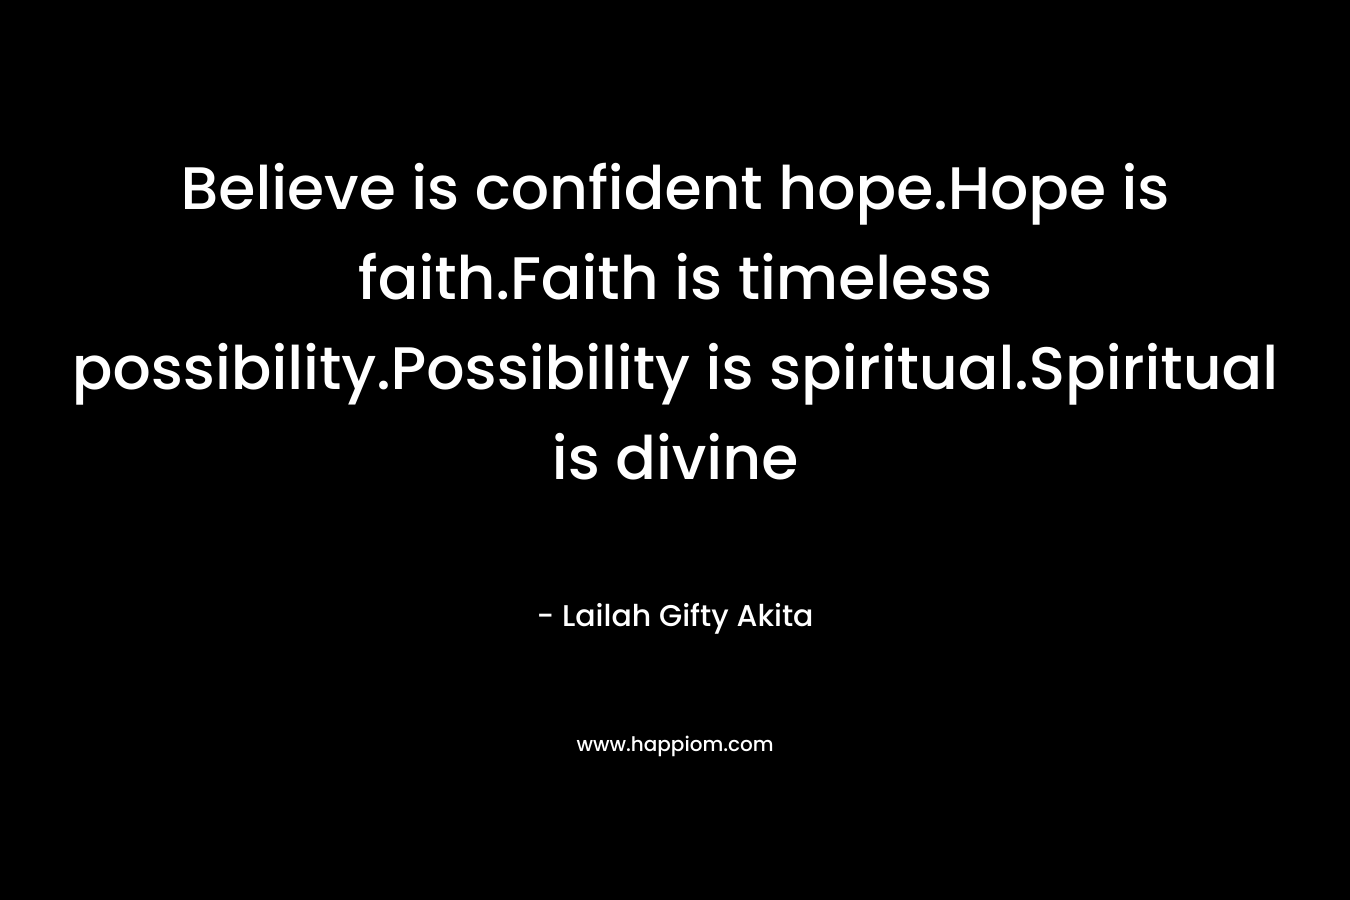 Believe is confident hope.Hope is faith.Faith is timeless possibility.Possibility is spiritual.Spiritual is divine – Lailah Gifty Akita